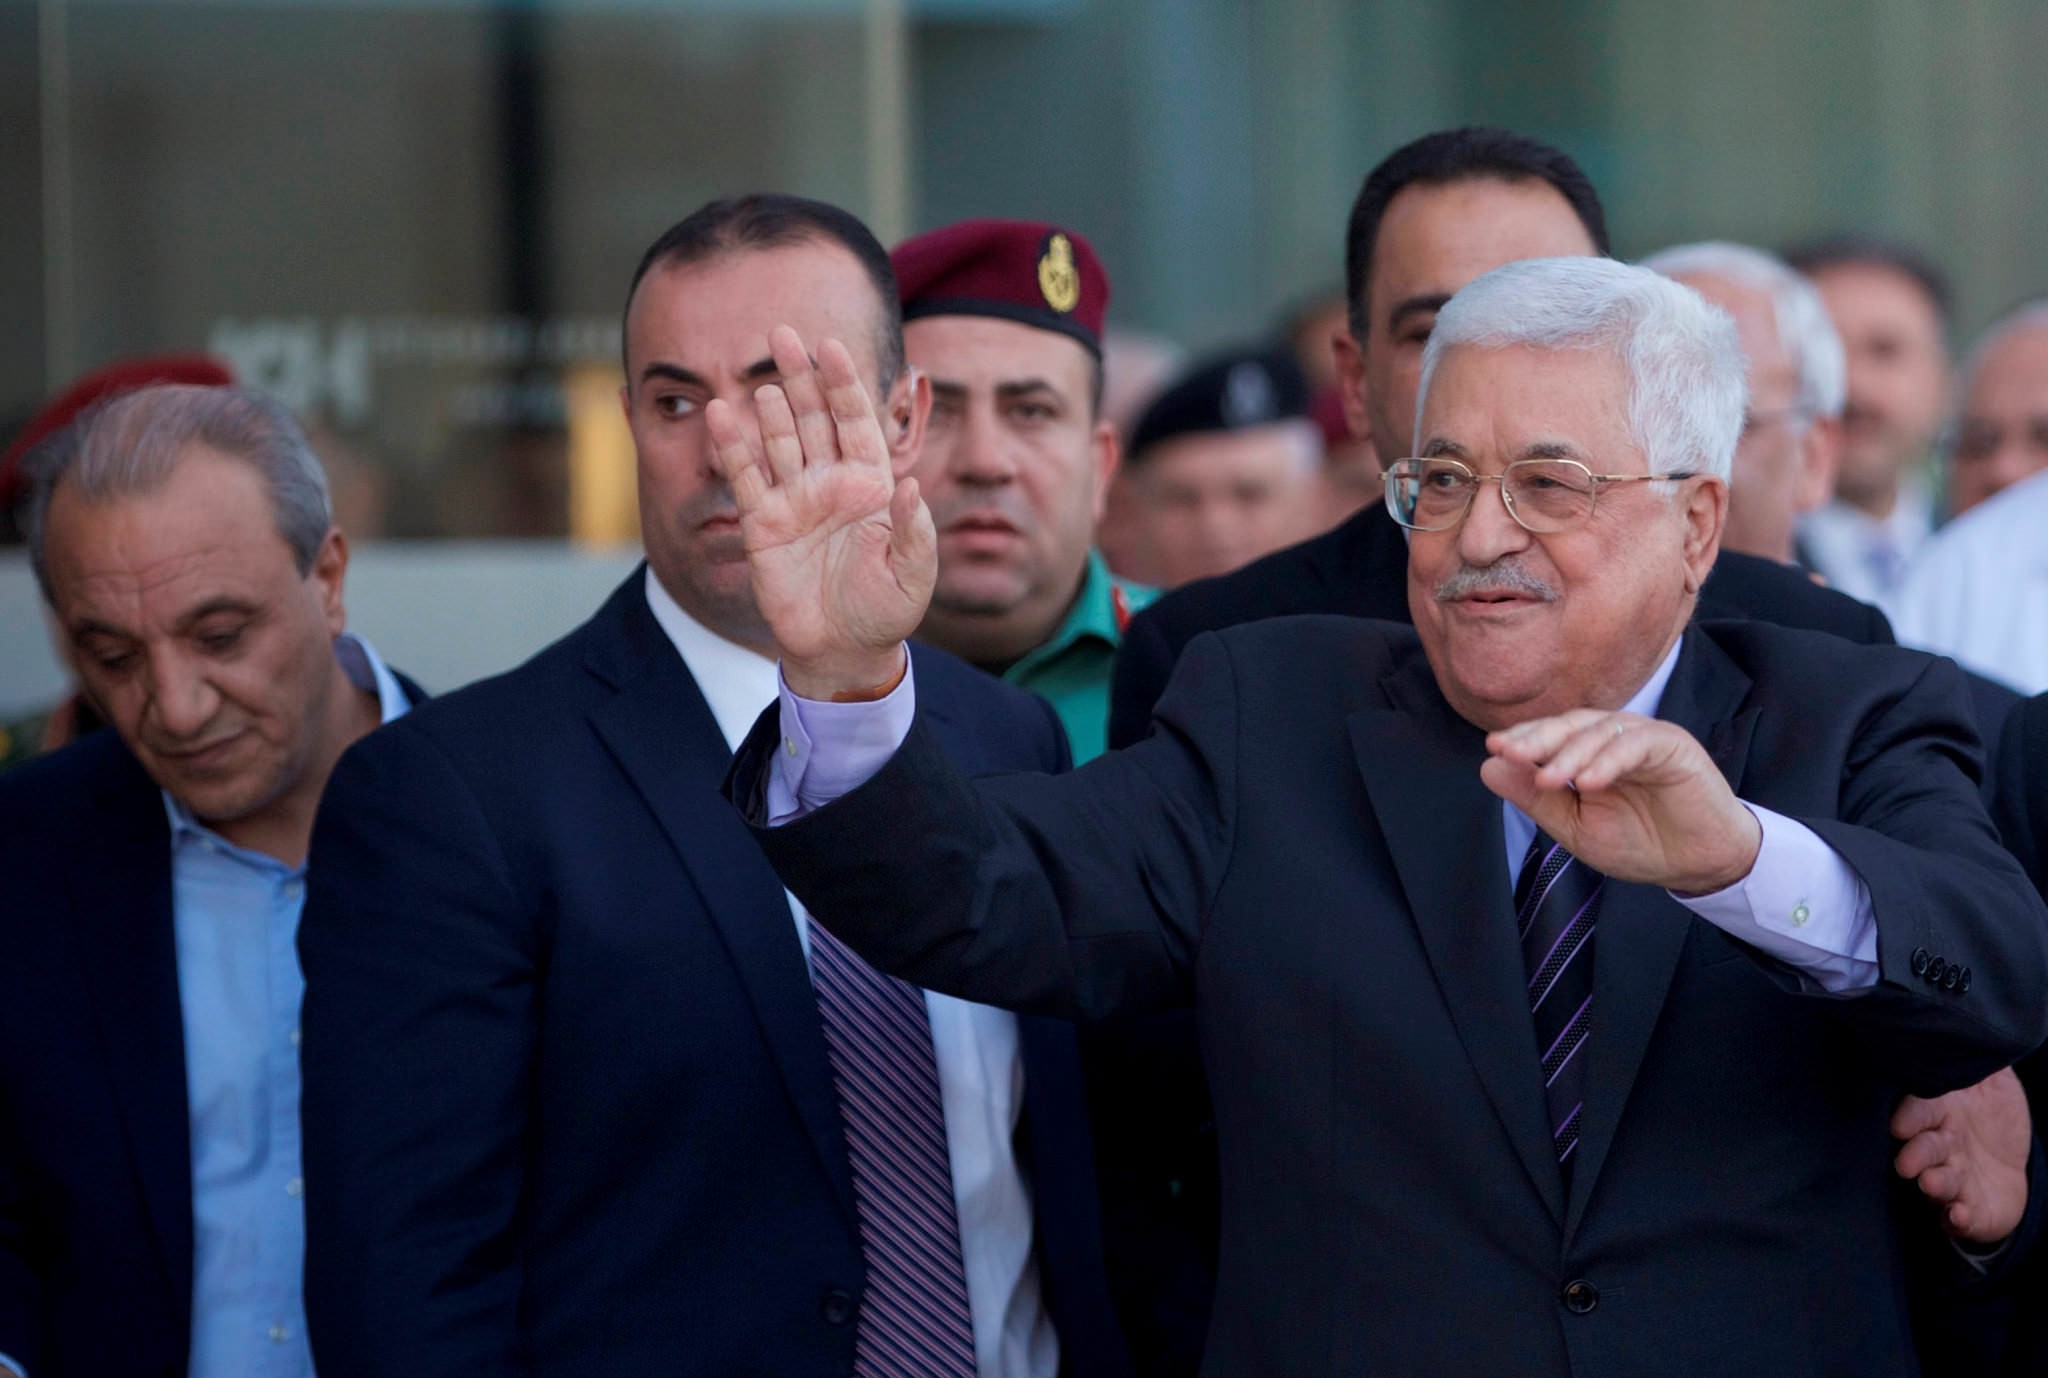 Palestinian President Mahmoud Abbas waves after leaving the hospital in the West Bank city of Ramallah, October 6, 2016. (REUTERS Photo)